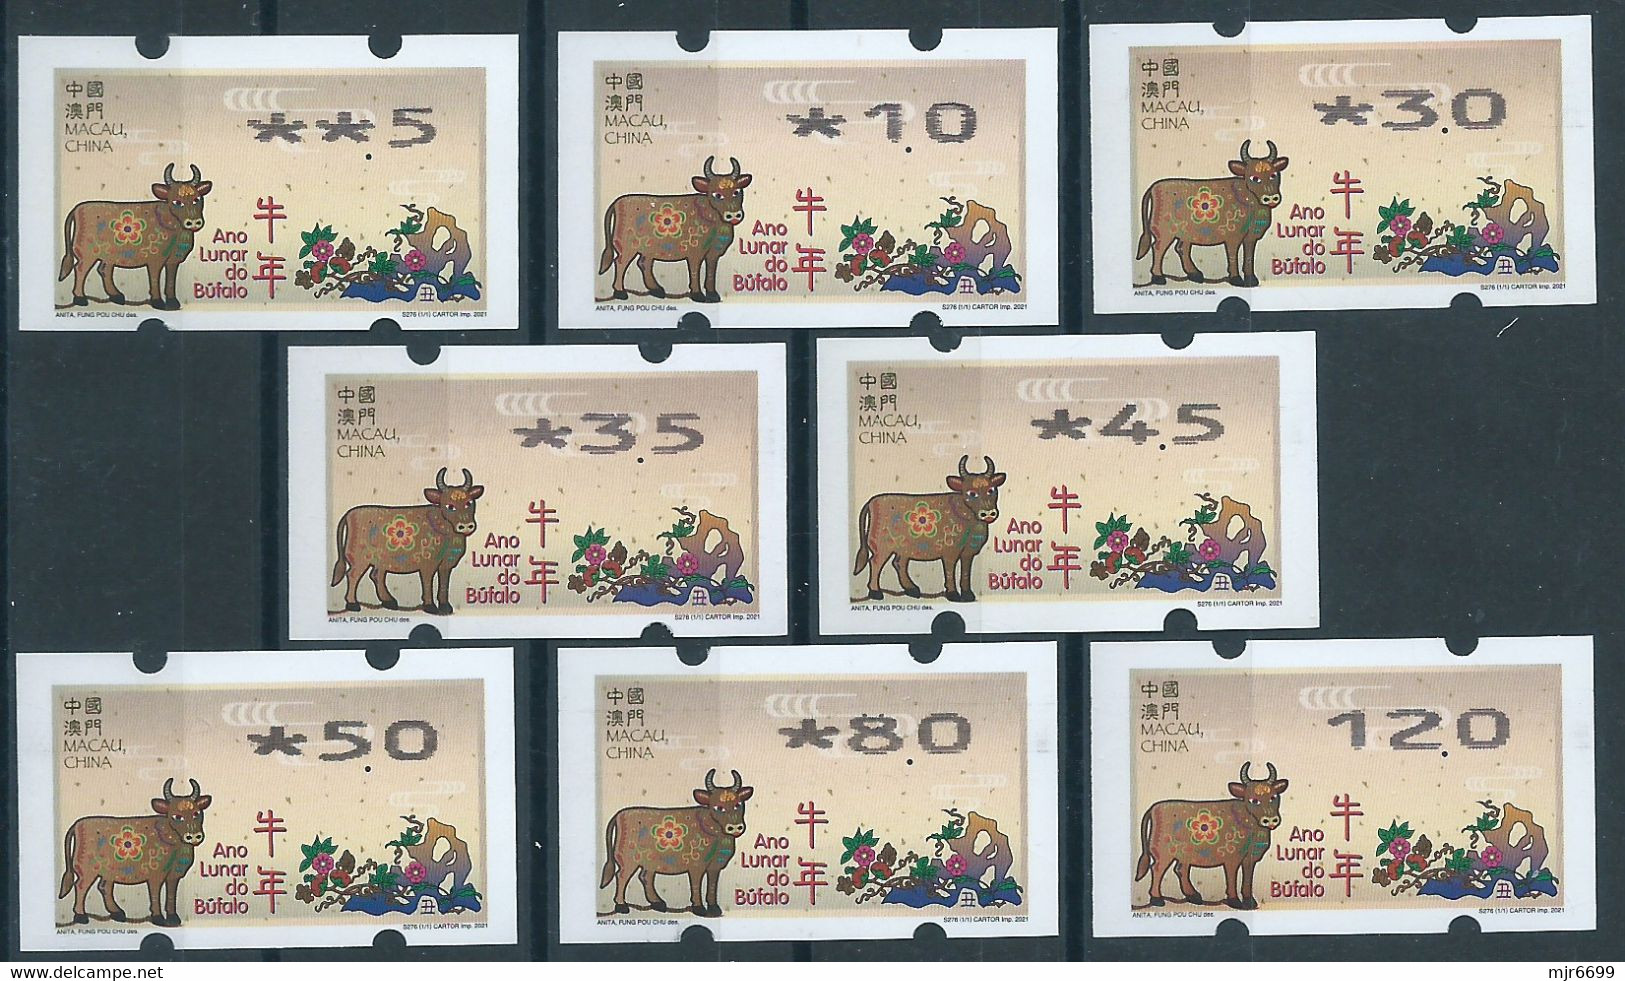 MACAU 2021 ZODIAC YEAR OF THE OX/COW ATM LABELS NAGLER SET OF 8 VALUES - Automaten